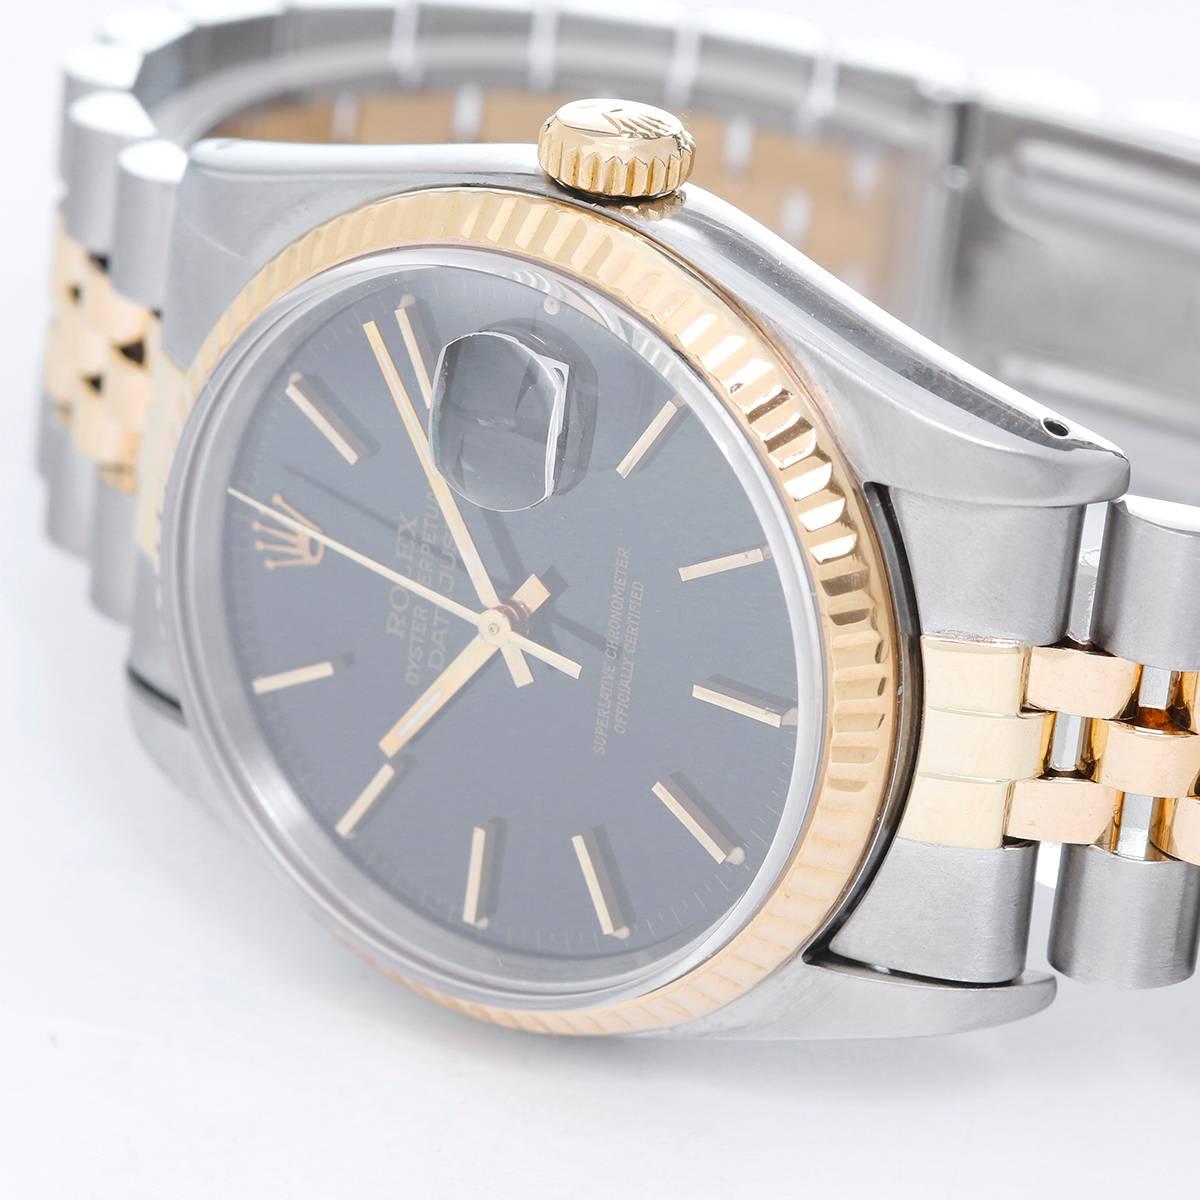 Rolex Datejust Men's 2-Tone Watch 16233 -  Automatic winding, 31 jewels, Quickset, sapphire crystal. Stainless steel with 18k yellow gold fluted bezel  (36mm diameter). Black dial with stick markers. Stainless steel and 18k yellow gold Jubilee